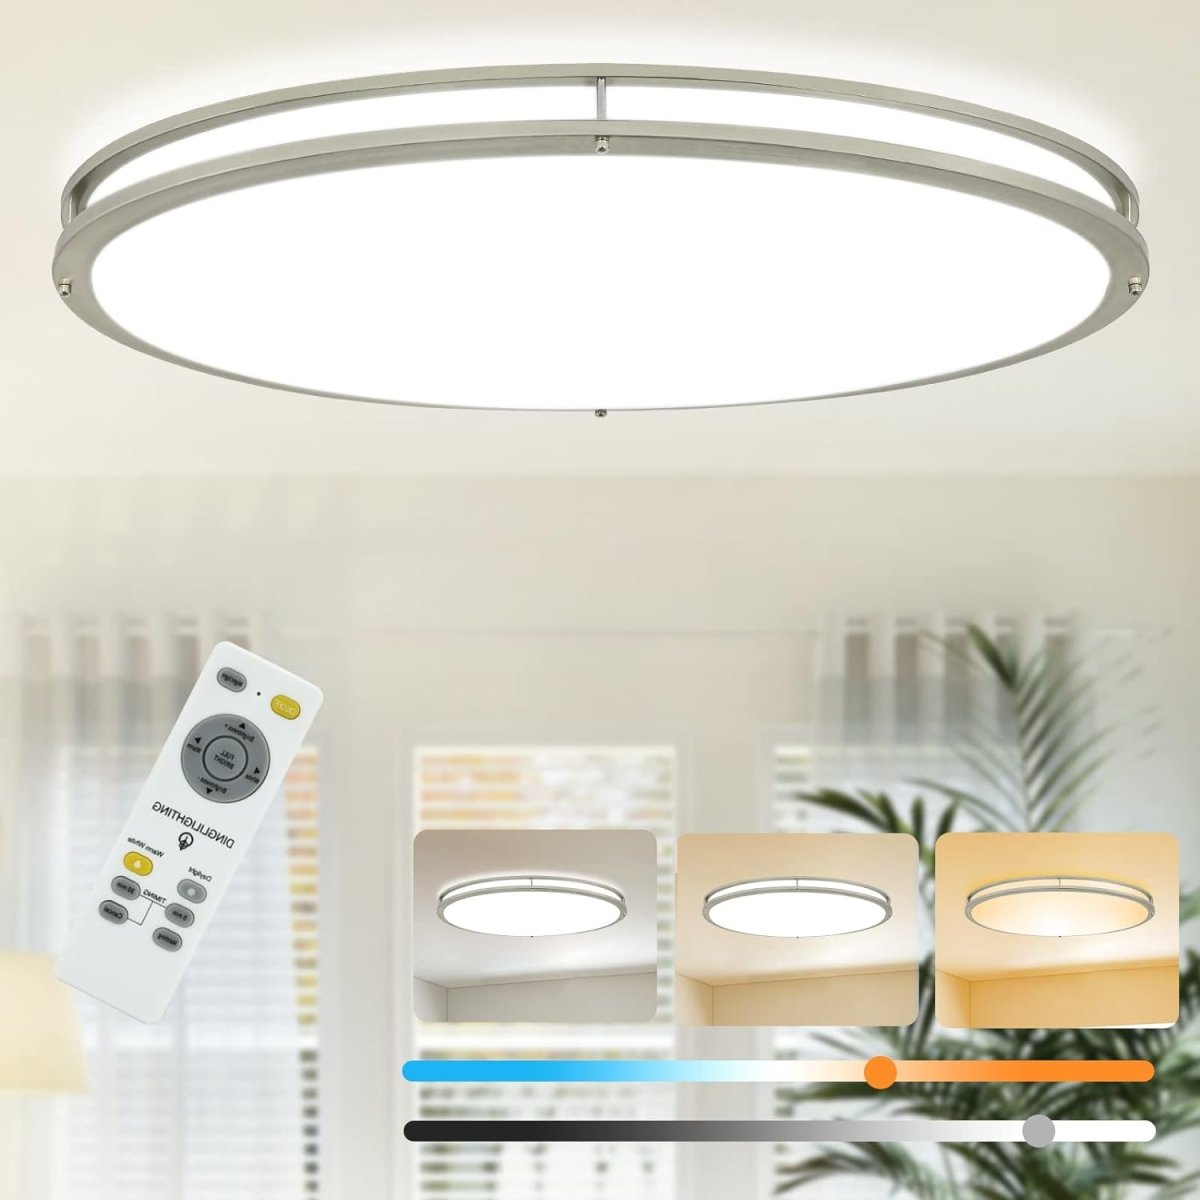 DLLT 32In Oval LED Ceiling Light Fixture, 65W Dimmable LED Flush Mount Ceiling Light with Remote, 3000K/4000K/5000K Adjustable, Brush Nickel Finish for Bedroom/Living Room/Dining Room - WS-FPC39-65C-D 3 | DEPULEY